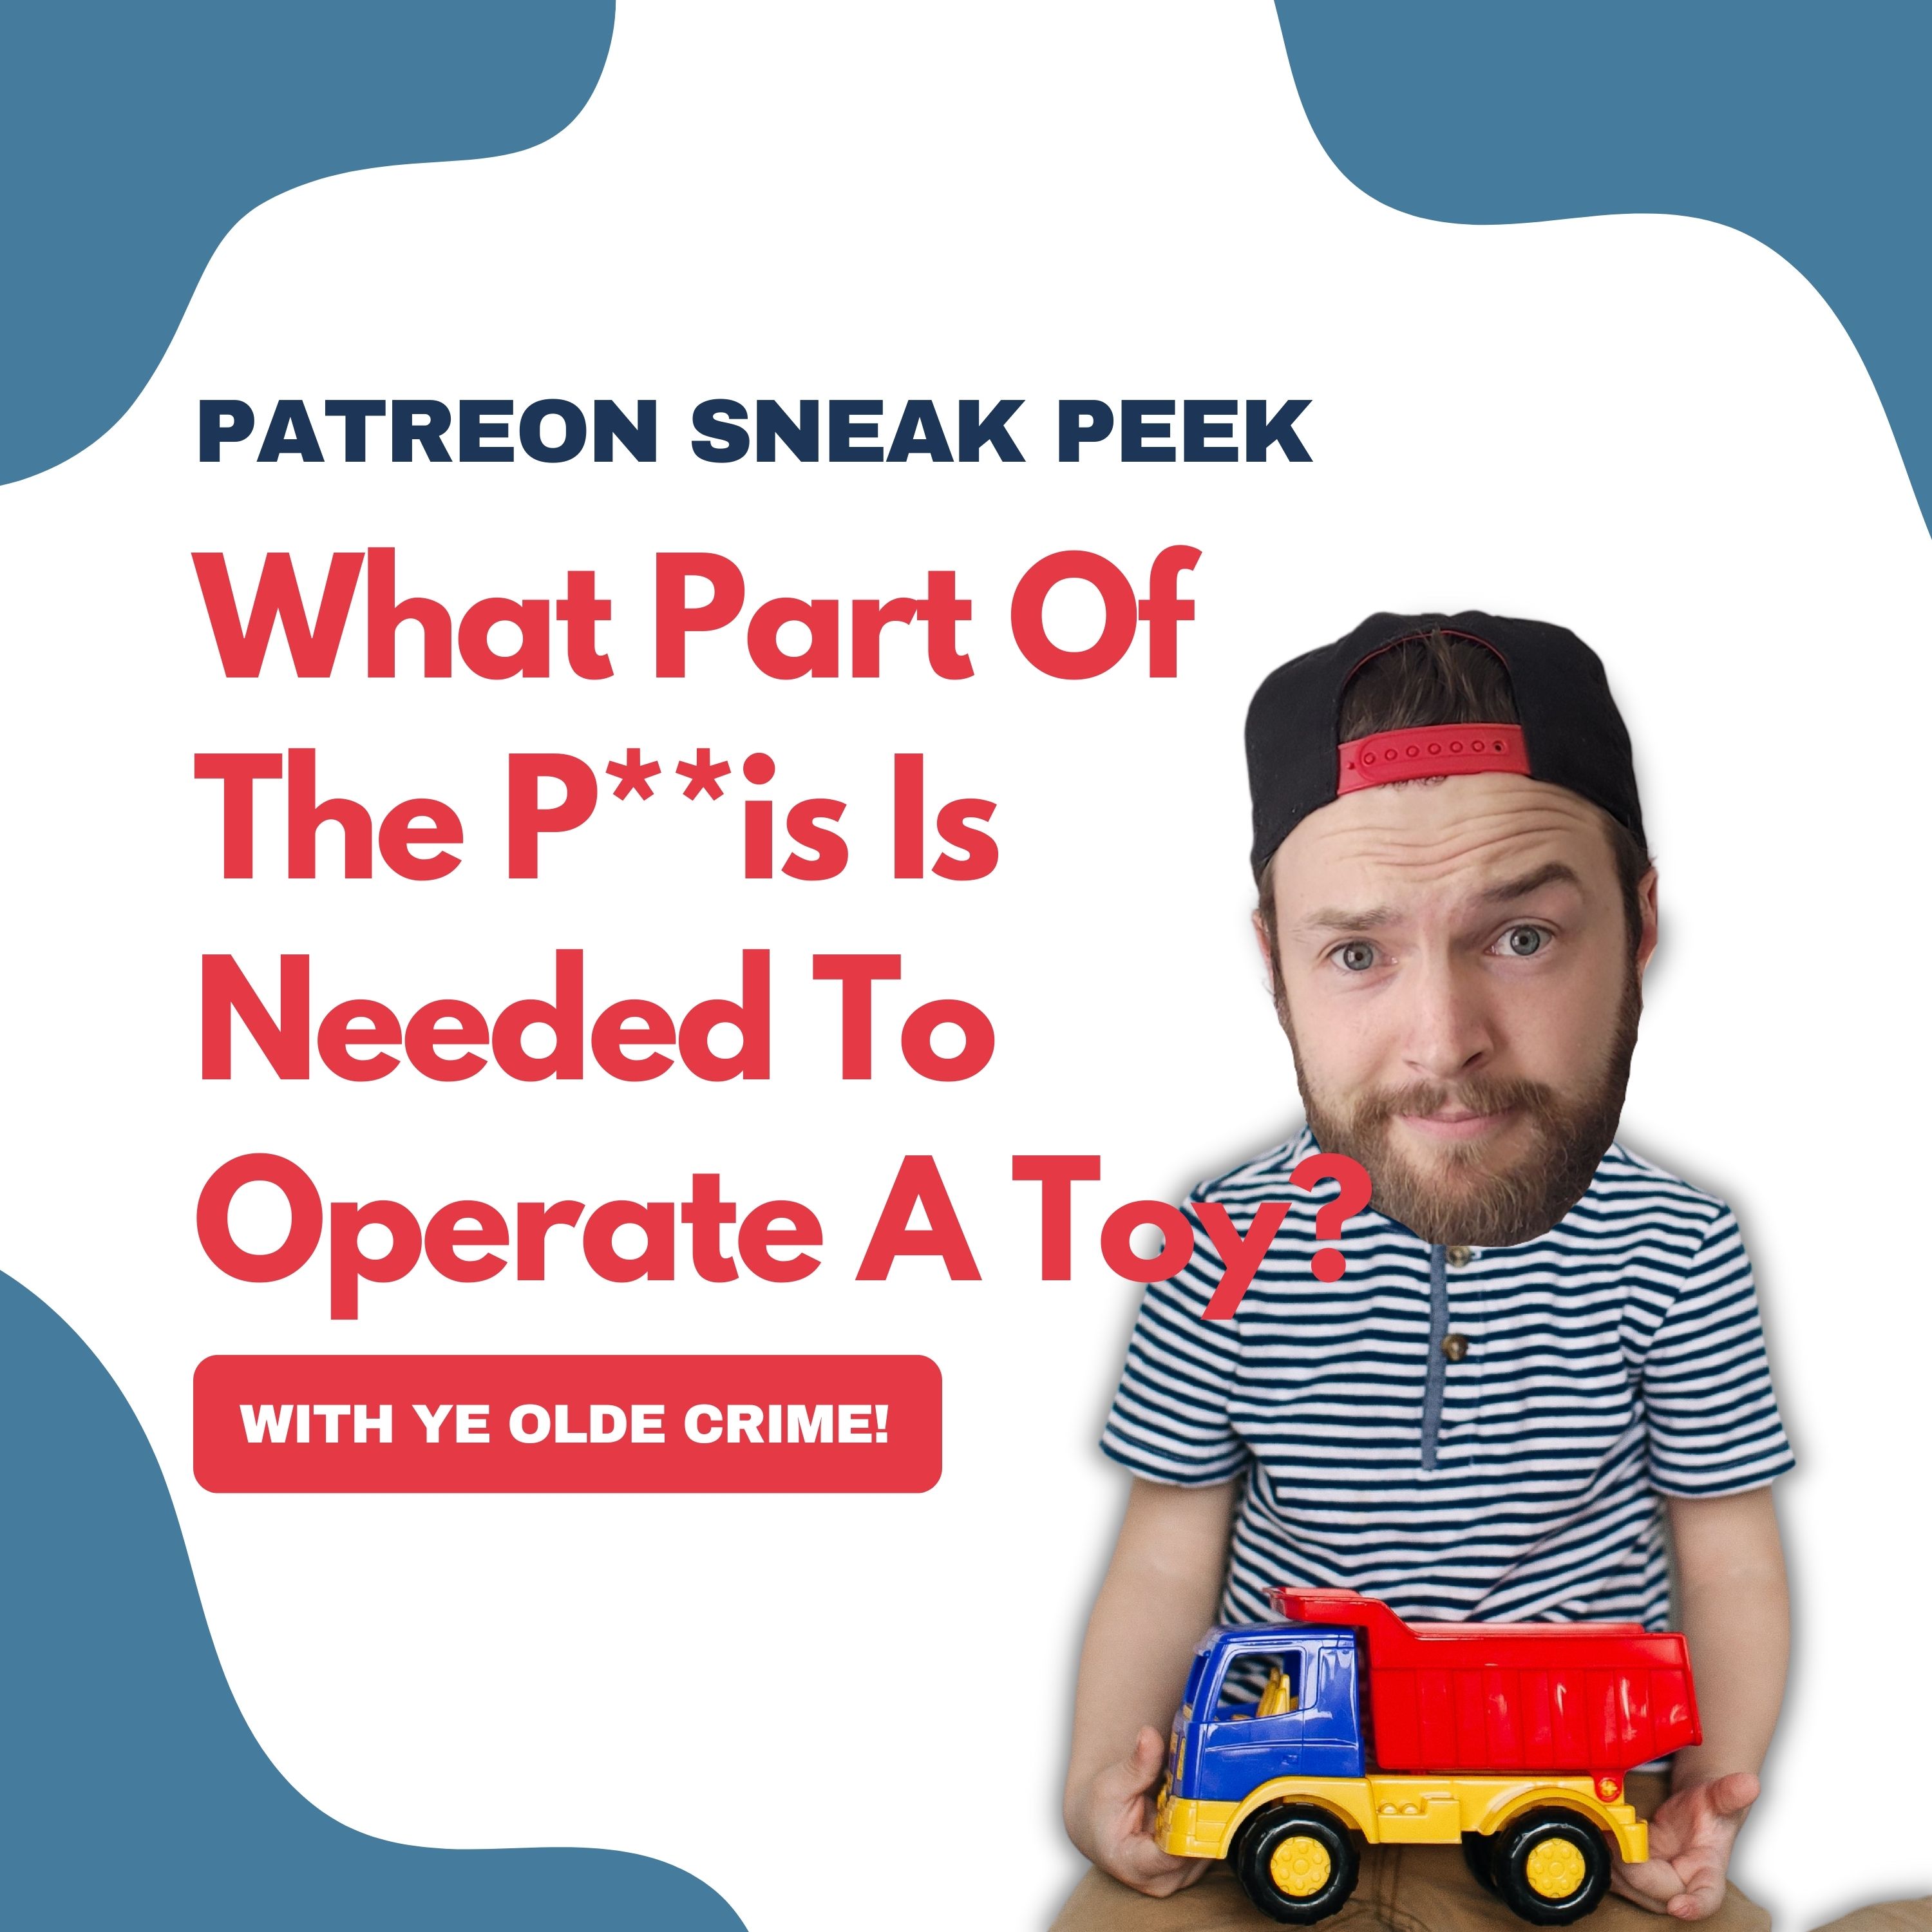 Patreon Sneak Peek | What Part Of The Penis Is Needed To Operate A Toy?